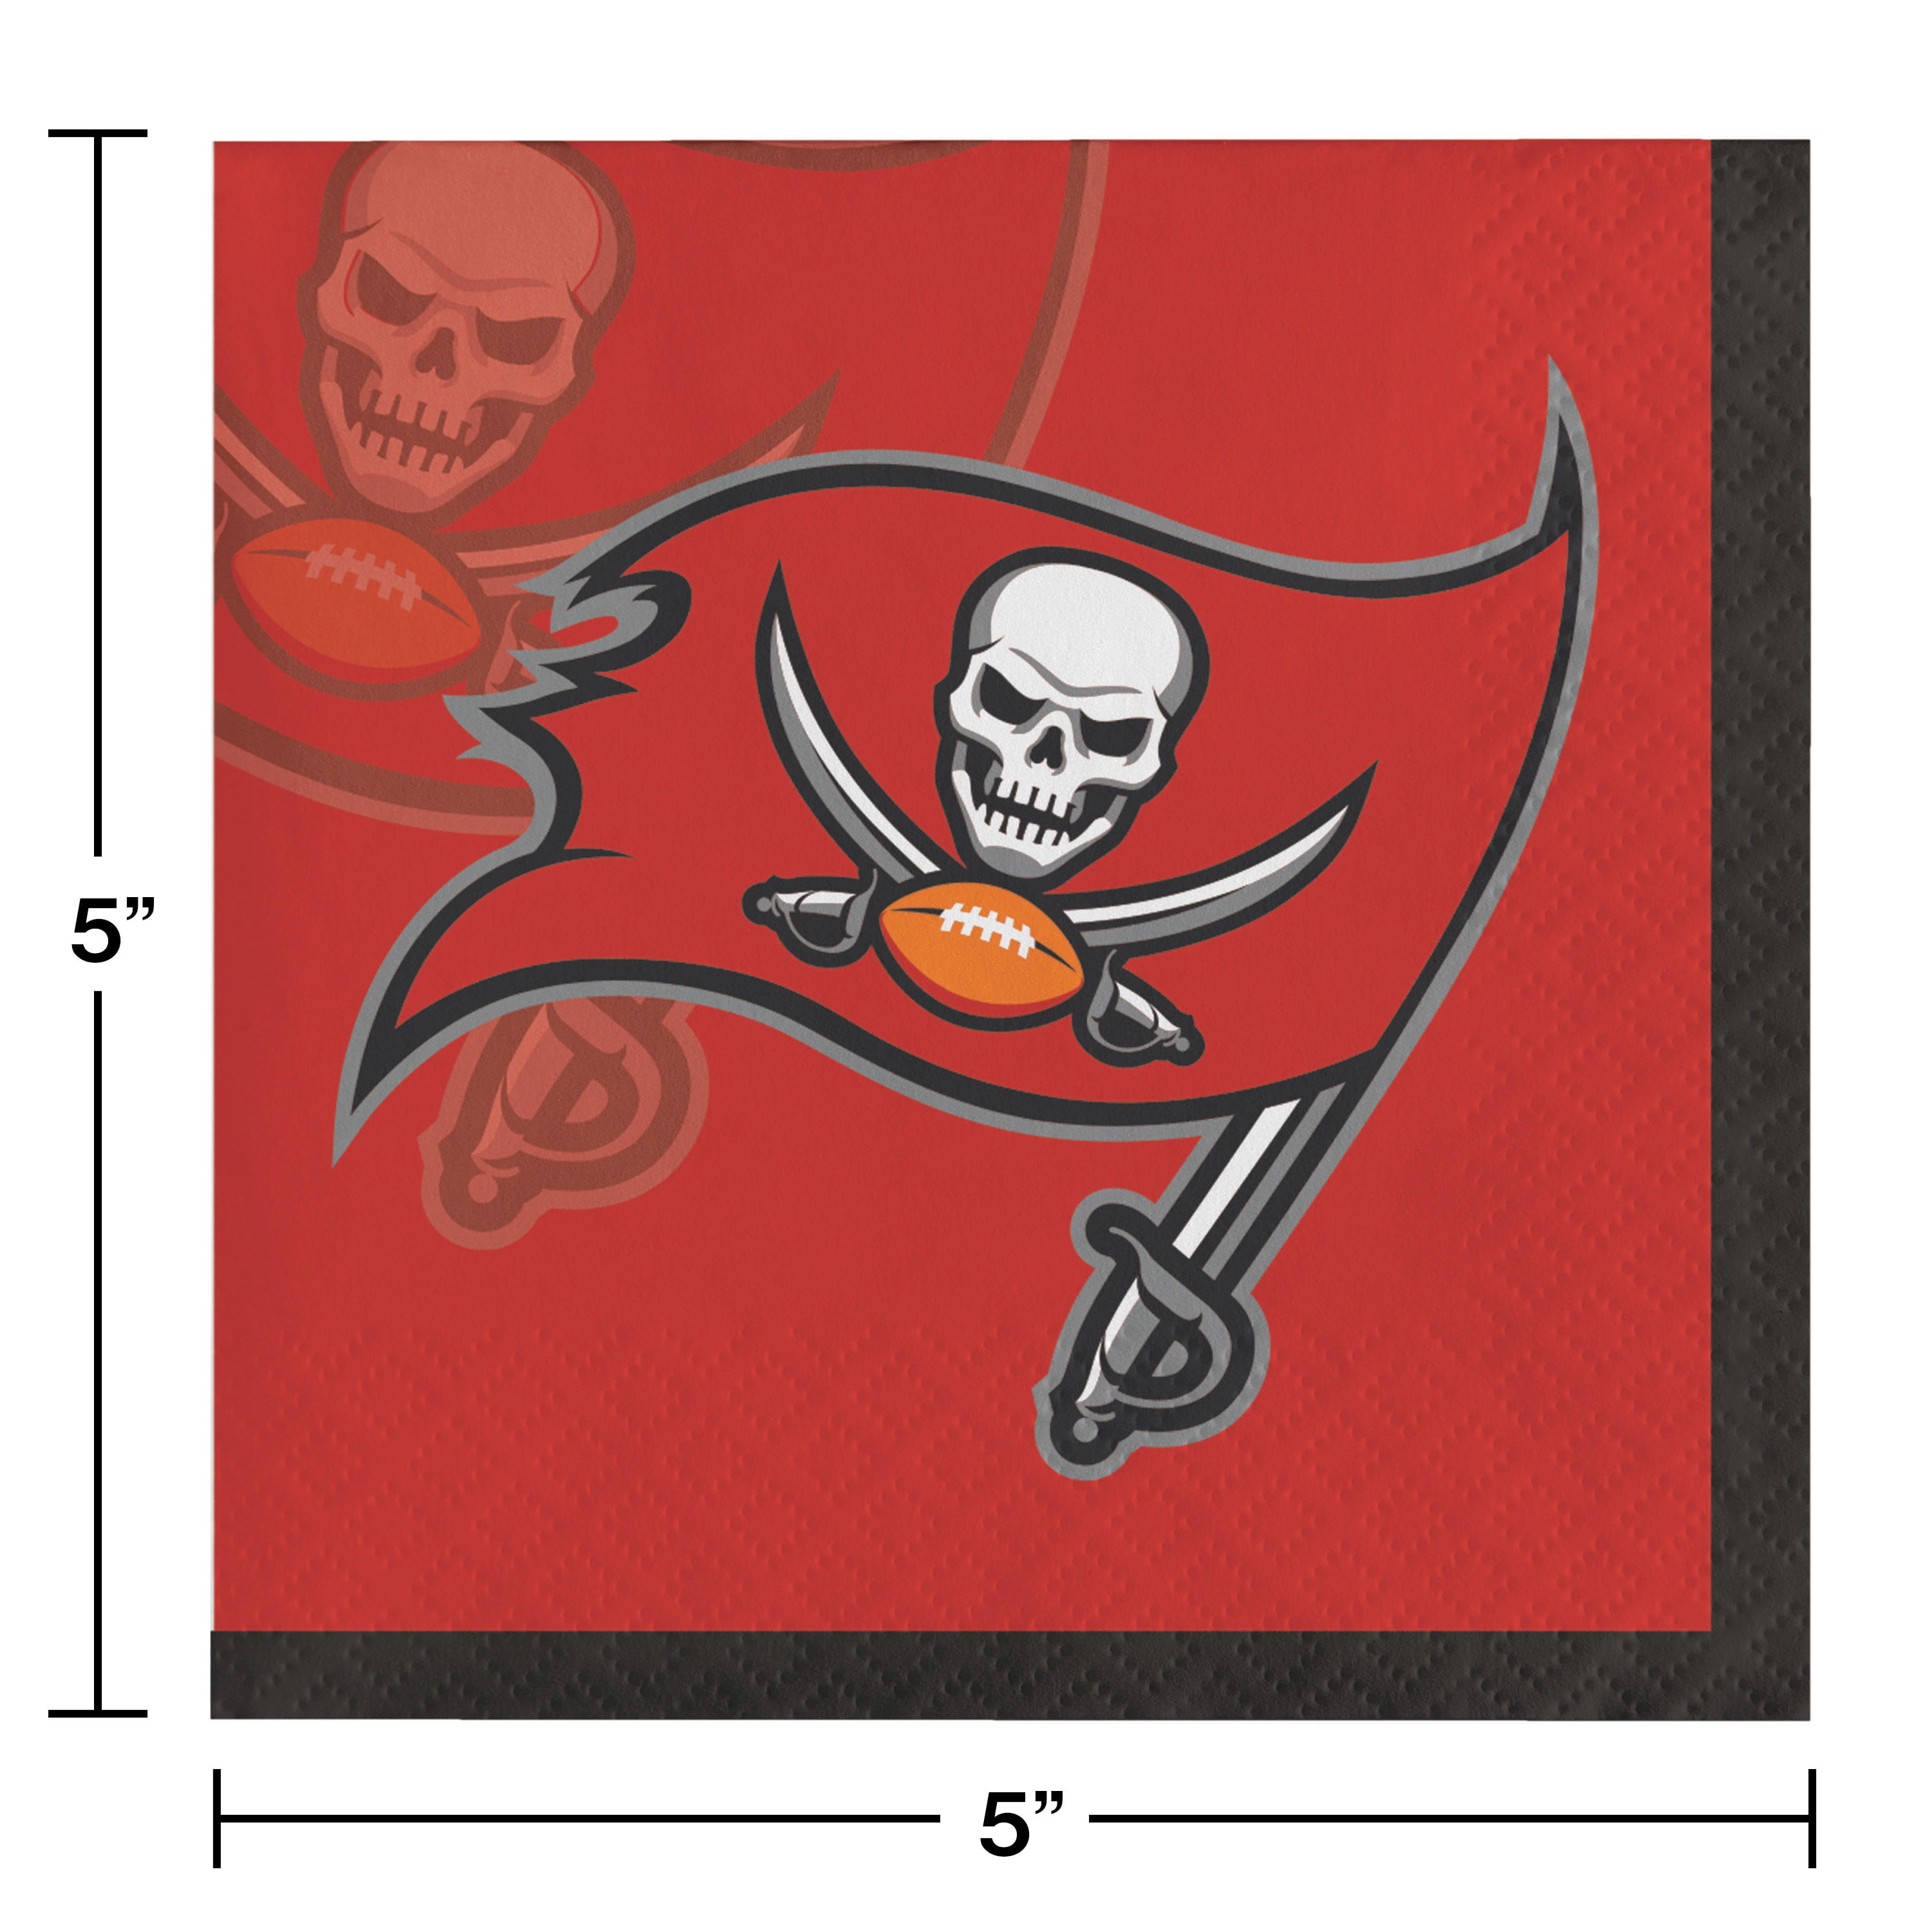 1 Pack of 4 Quality Plates Bucs Tampa Bay Buccaneers Logo Dinner Plates 